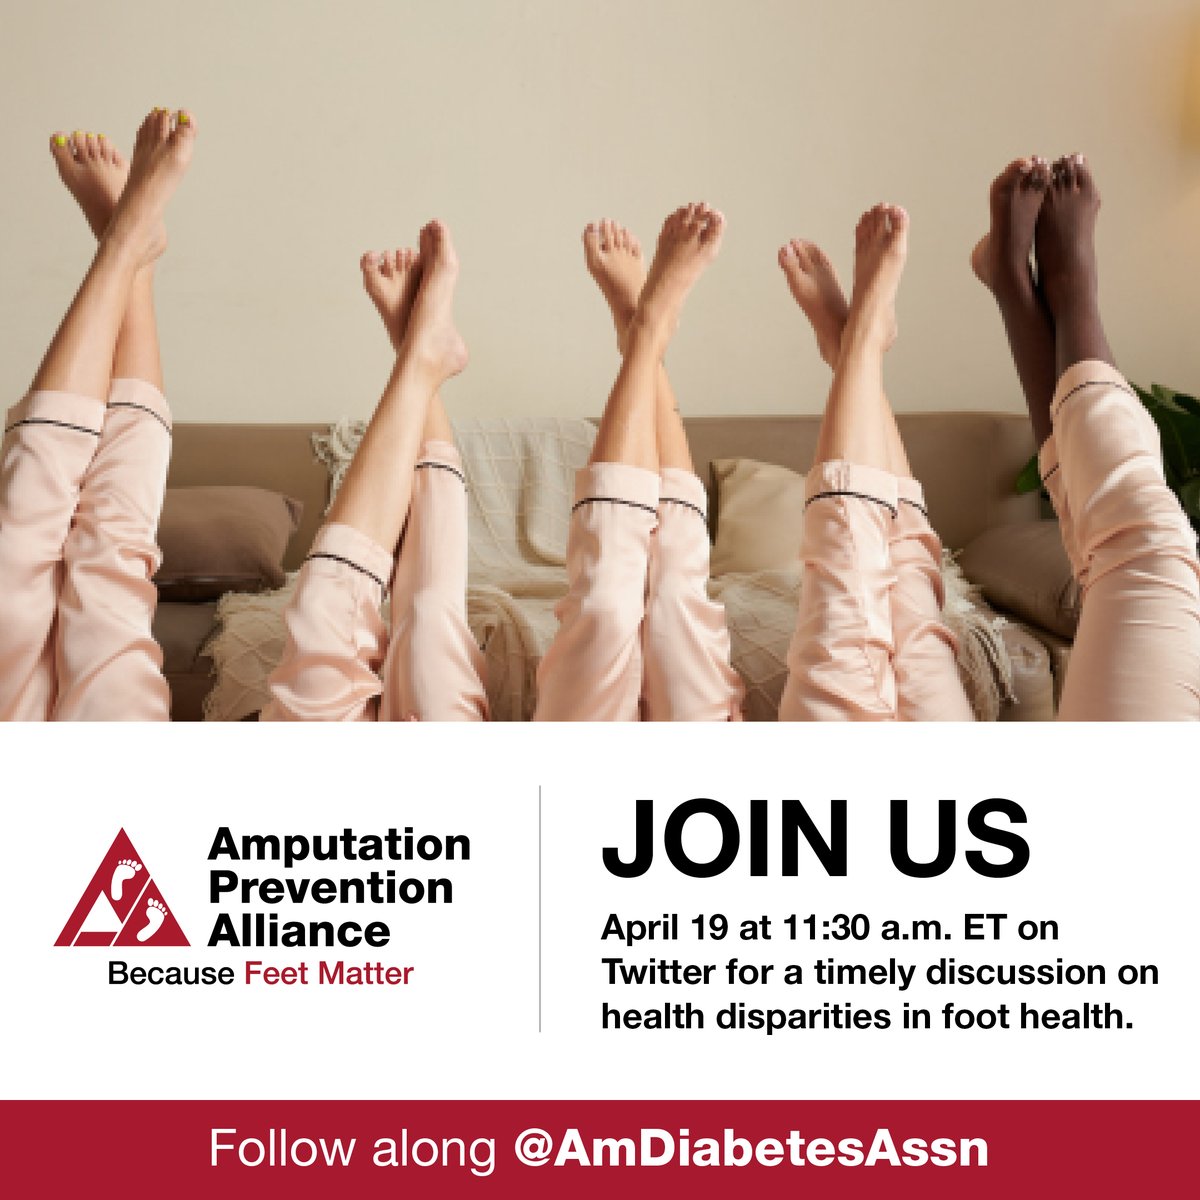 Join us TOMORROW on 4/19 at 11:30 a.m. ET for a LIVE TW chat with ADA's Amputation Prevention Alliance (APA) as we spread awareness about the risk factors and health disparities in preventing diabetes-related amputations. #BecauseFeetMatter #SaveLimbsSaveLives